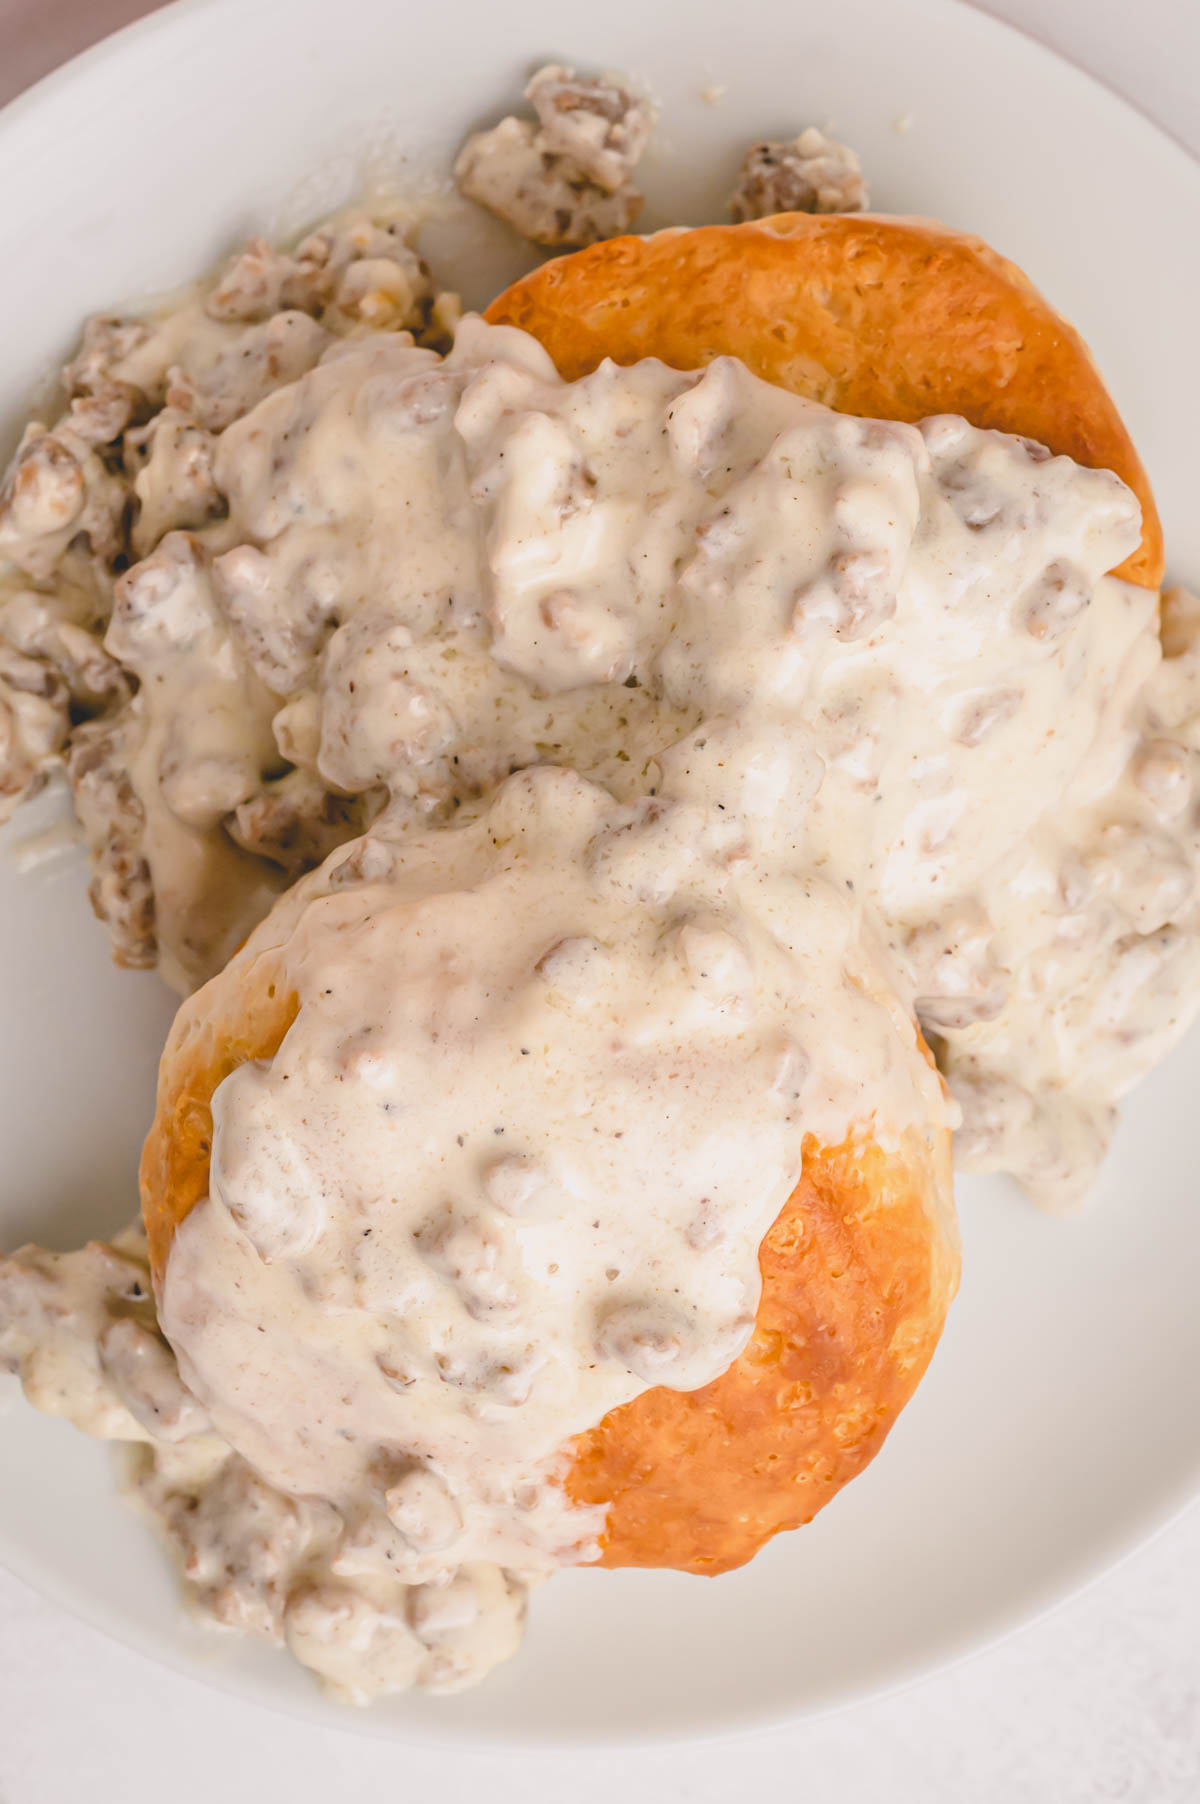 biscuits smothered in gravy.